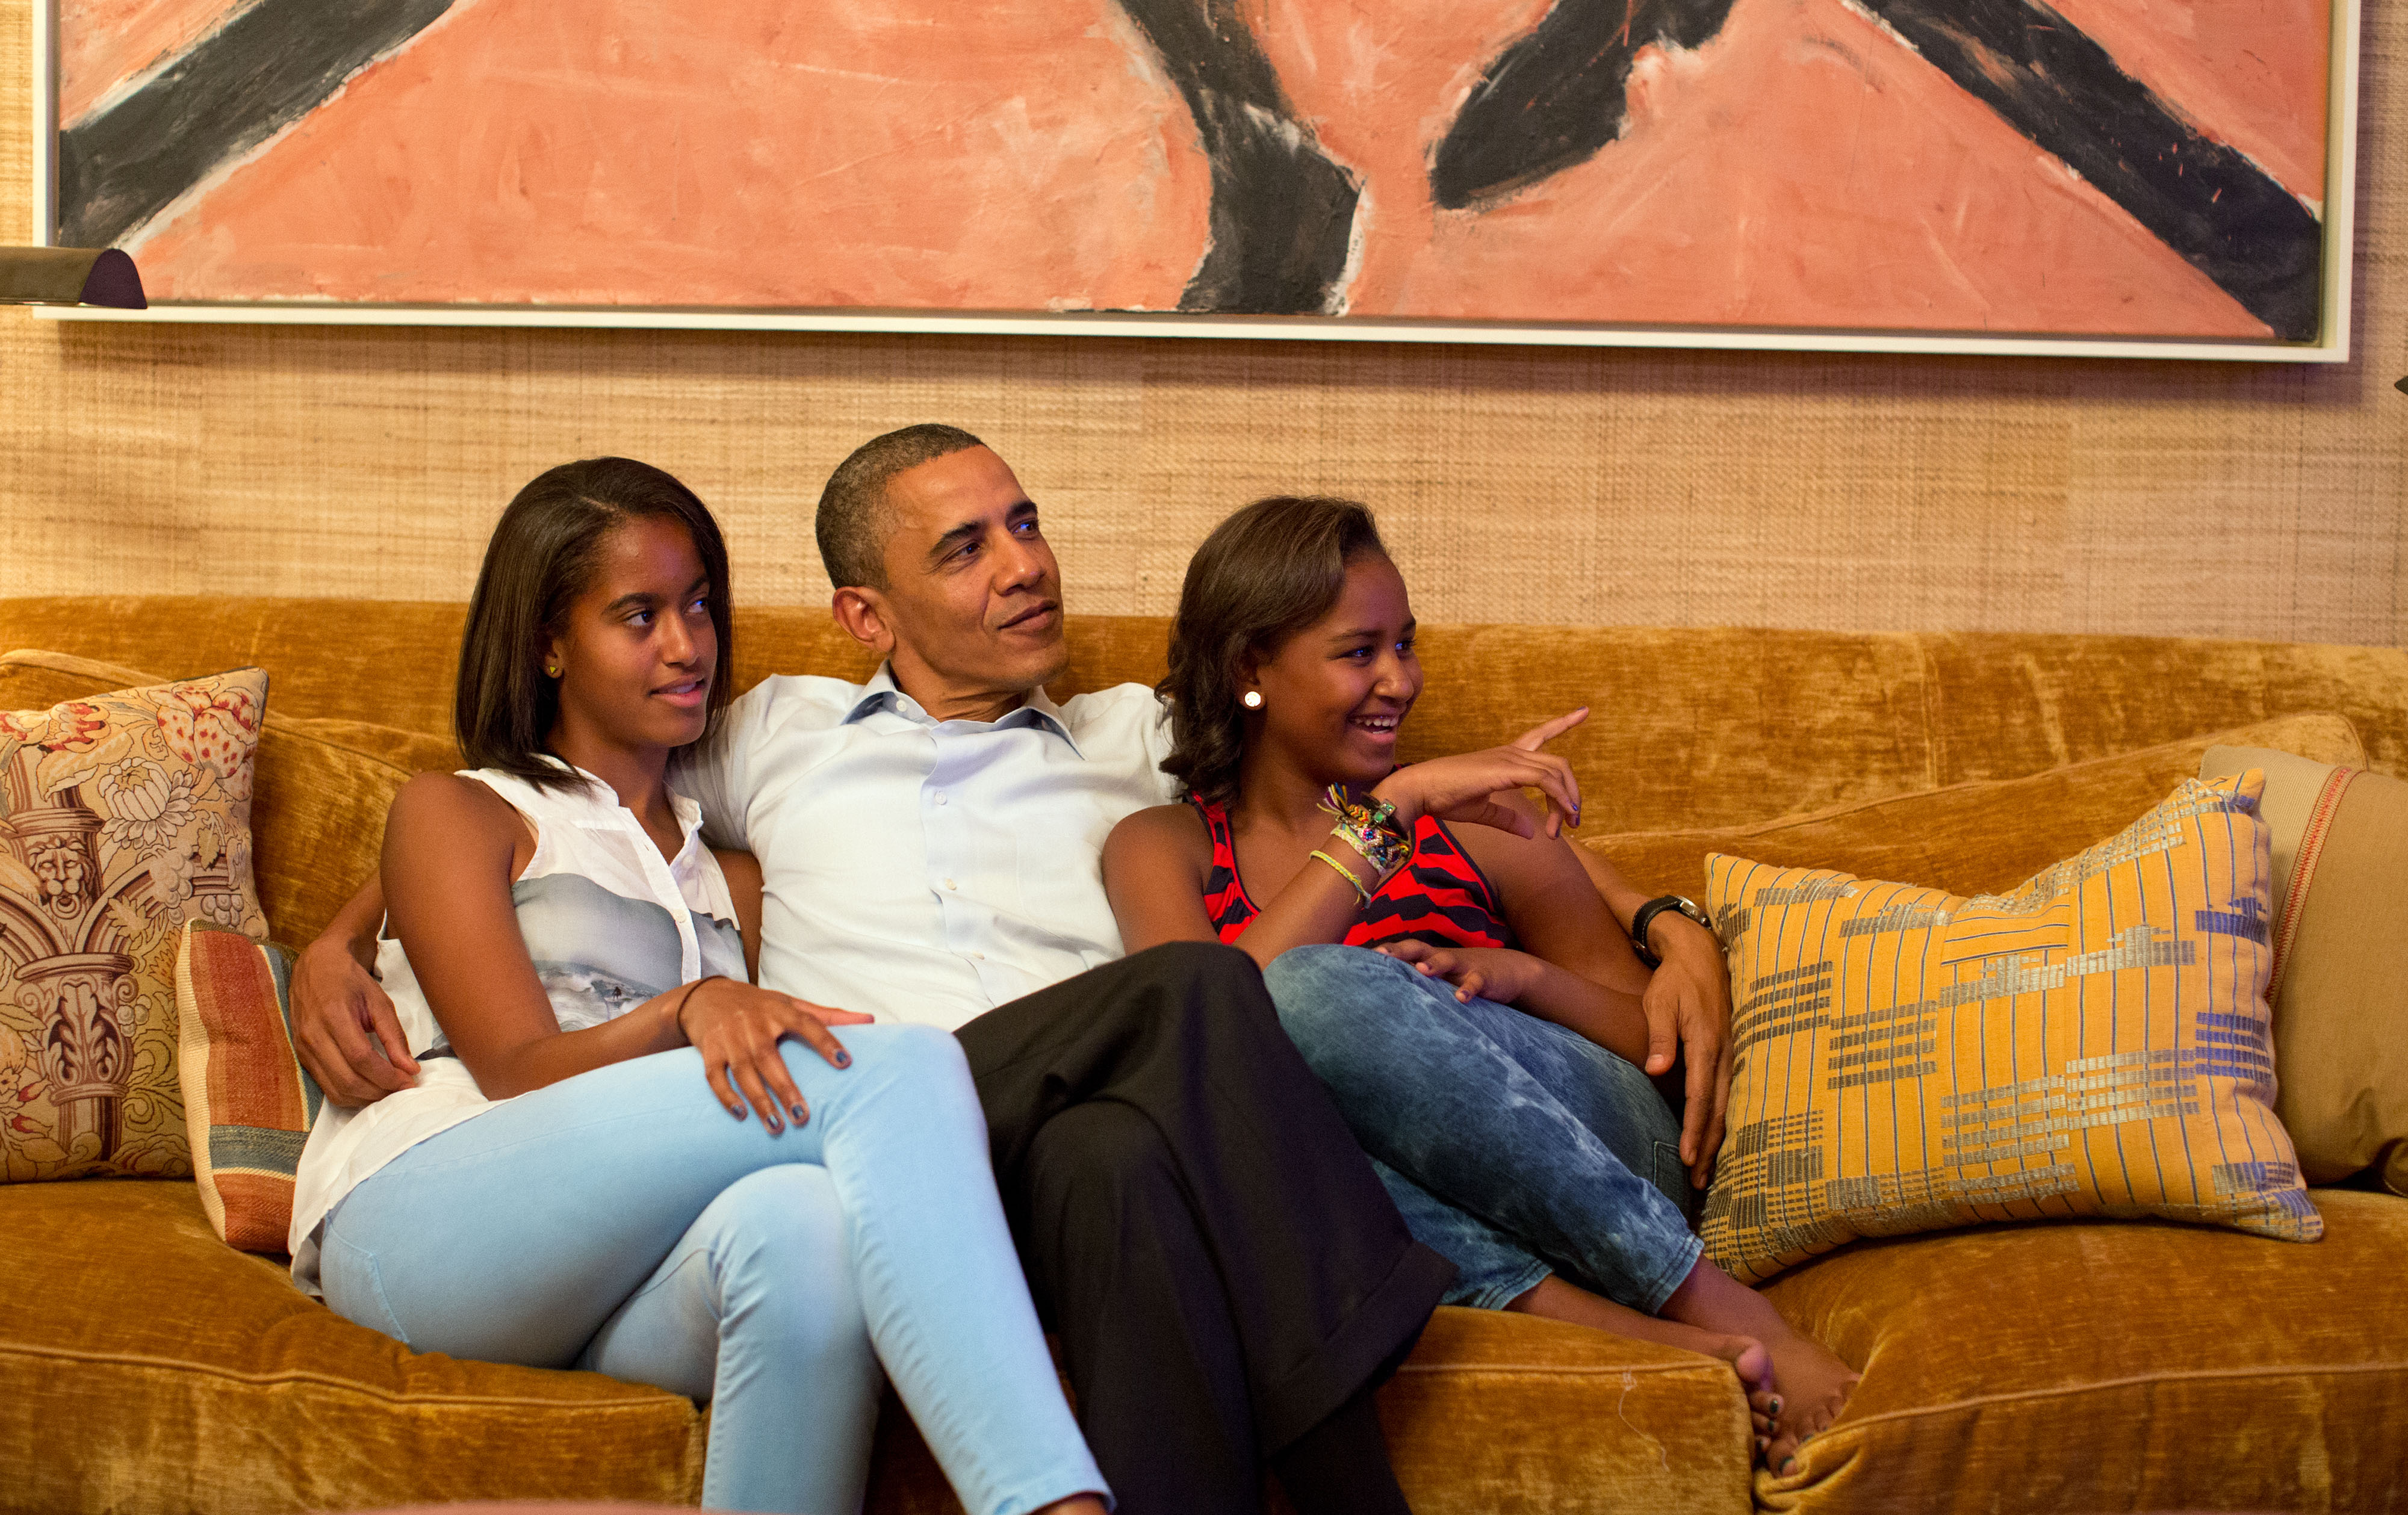 President Obama and his daughters, Malia and Sasha, watch on television as First Lady Michelle Obama takes the stage to deliver her speech at the Democratic National Convention, in the Treaty Room of the White House, on Sept. 4, 2012.